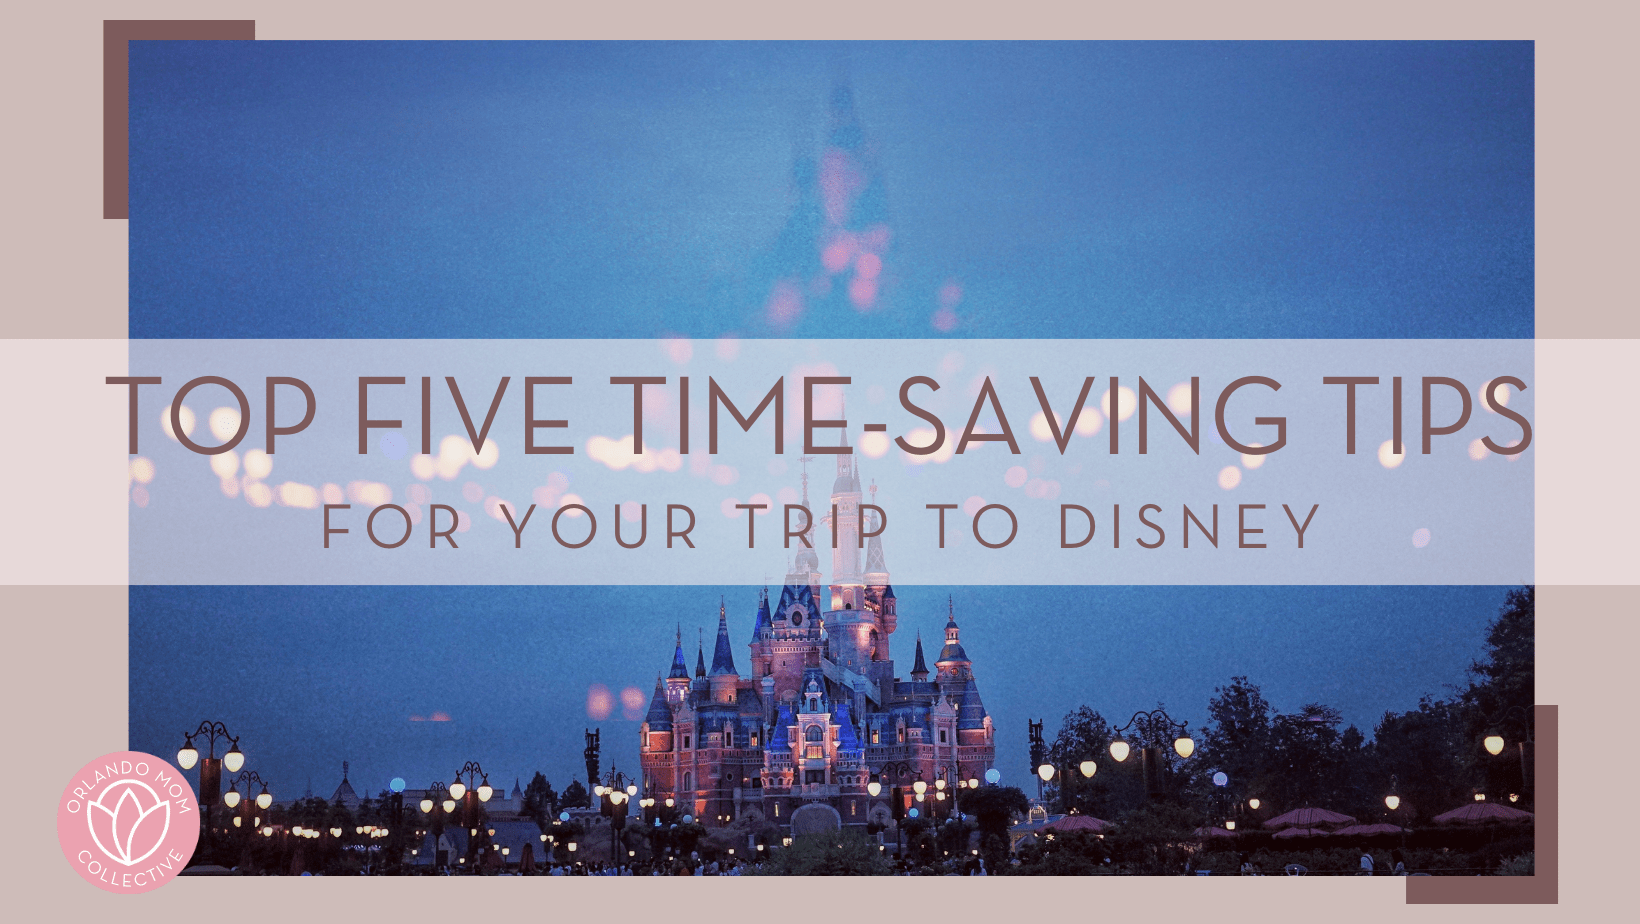 pan xiaozhen via unsplash image of cinderella castle lit up in purple, blues and pinks with dark blue sky and words 'top five time-saving tips for your trip to disney' in text in front of image